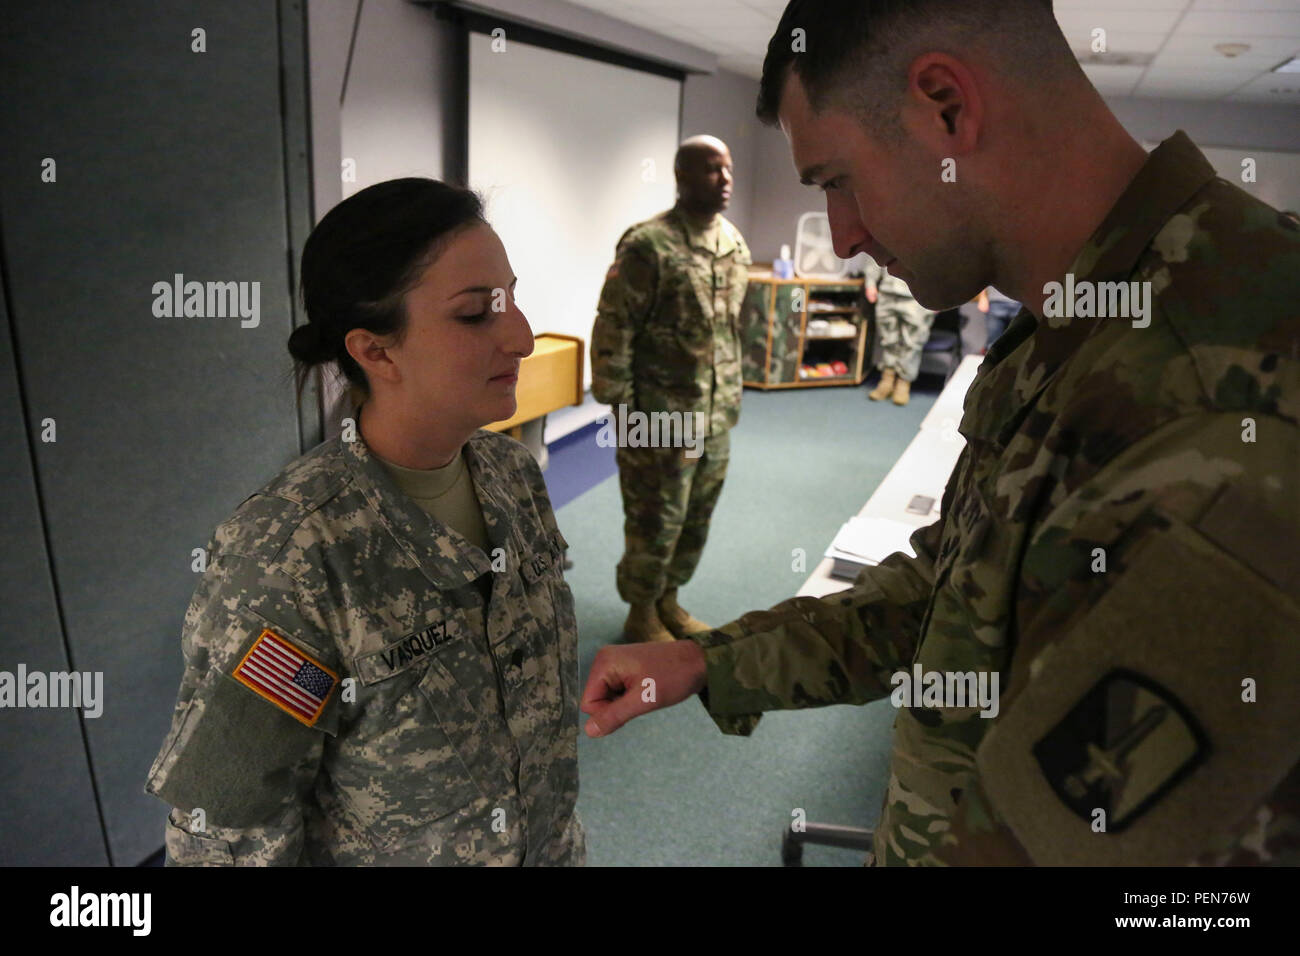 U.S. Army Staff Sgt. Daniel Luksan, right, 55th Signal Company, promotes Pfc. Angelica Vasquez from private first class to specialist, Fort Meade, Md., Nov. 25, 2015. Pfc. Vasquez was promoted to the next rank in view of her hard work, dedication, and potential for leadership. (U.S. Army photo by Pvt. Lewis, Antonio/Released) Stock Photo